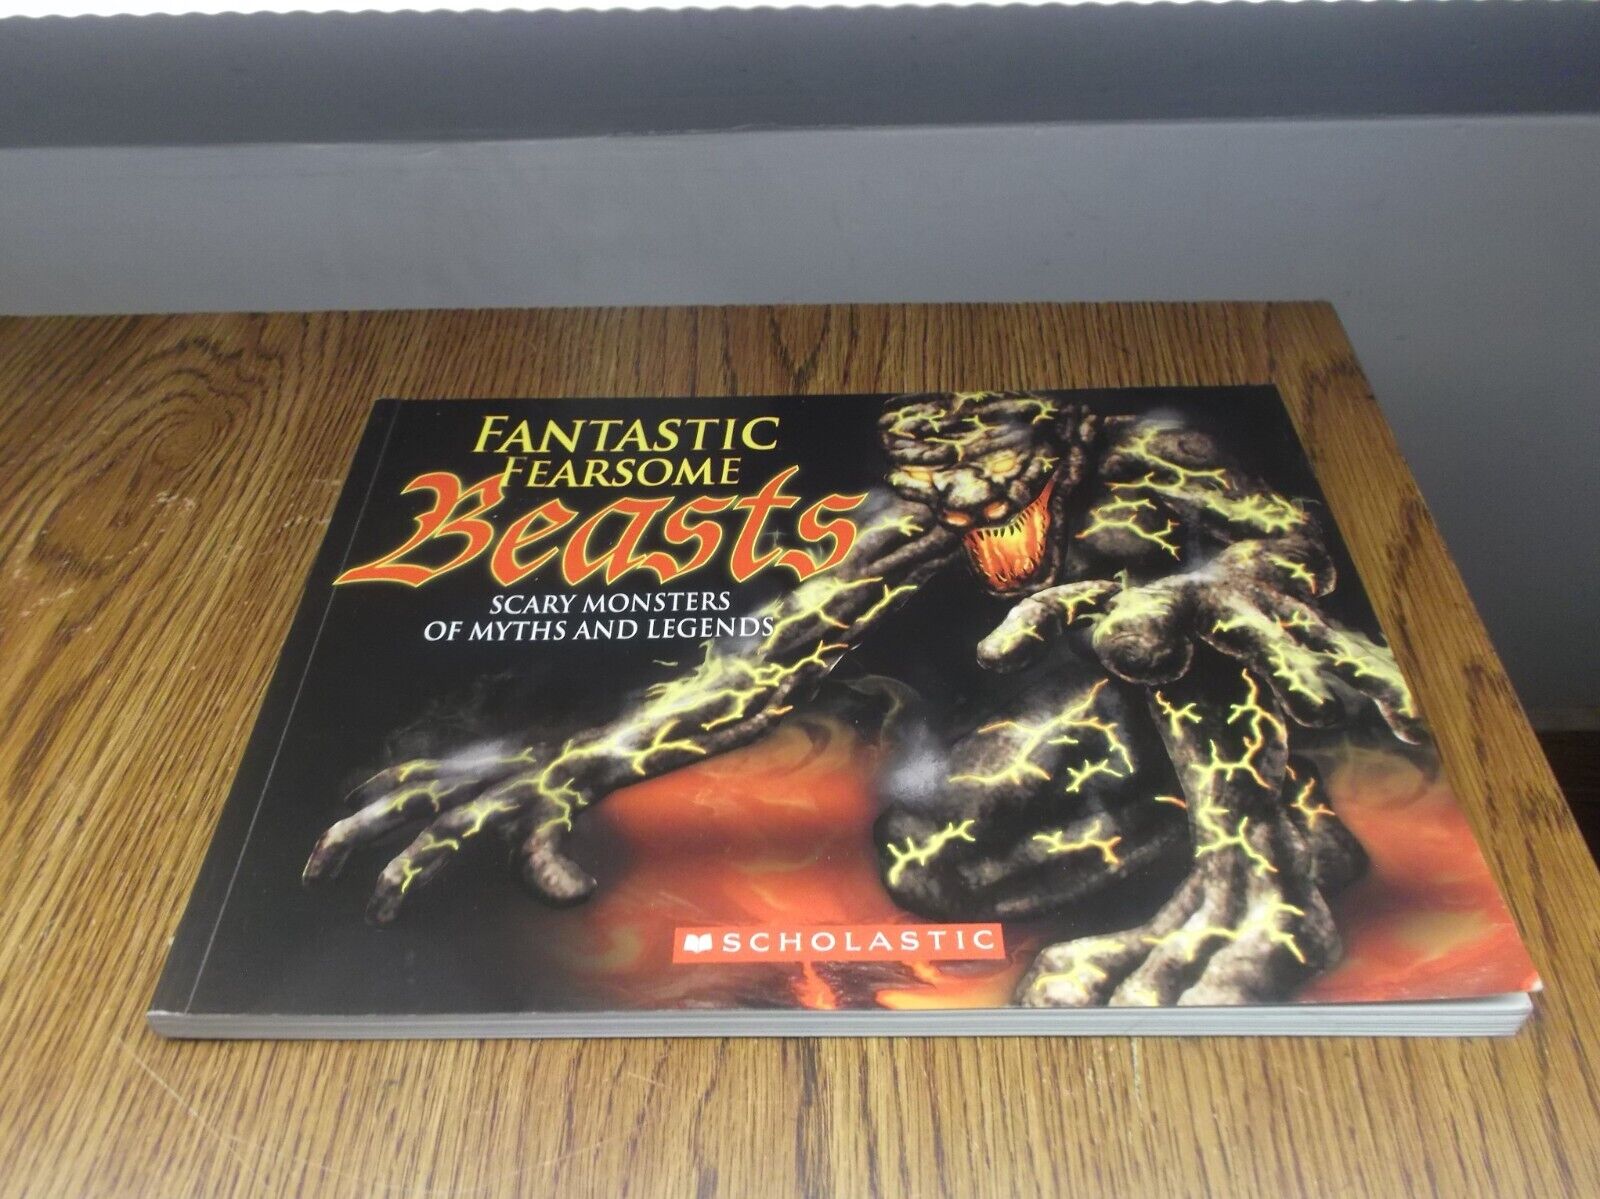 LKE NEW NICE FANTASTIC FEARSOME BEASTS SCARY MONSTERS OF MYTHS & LEGENDS 96 PGS